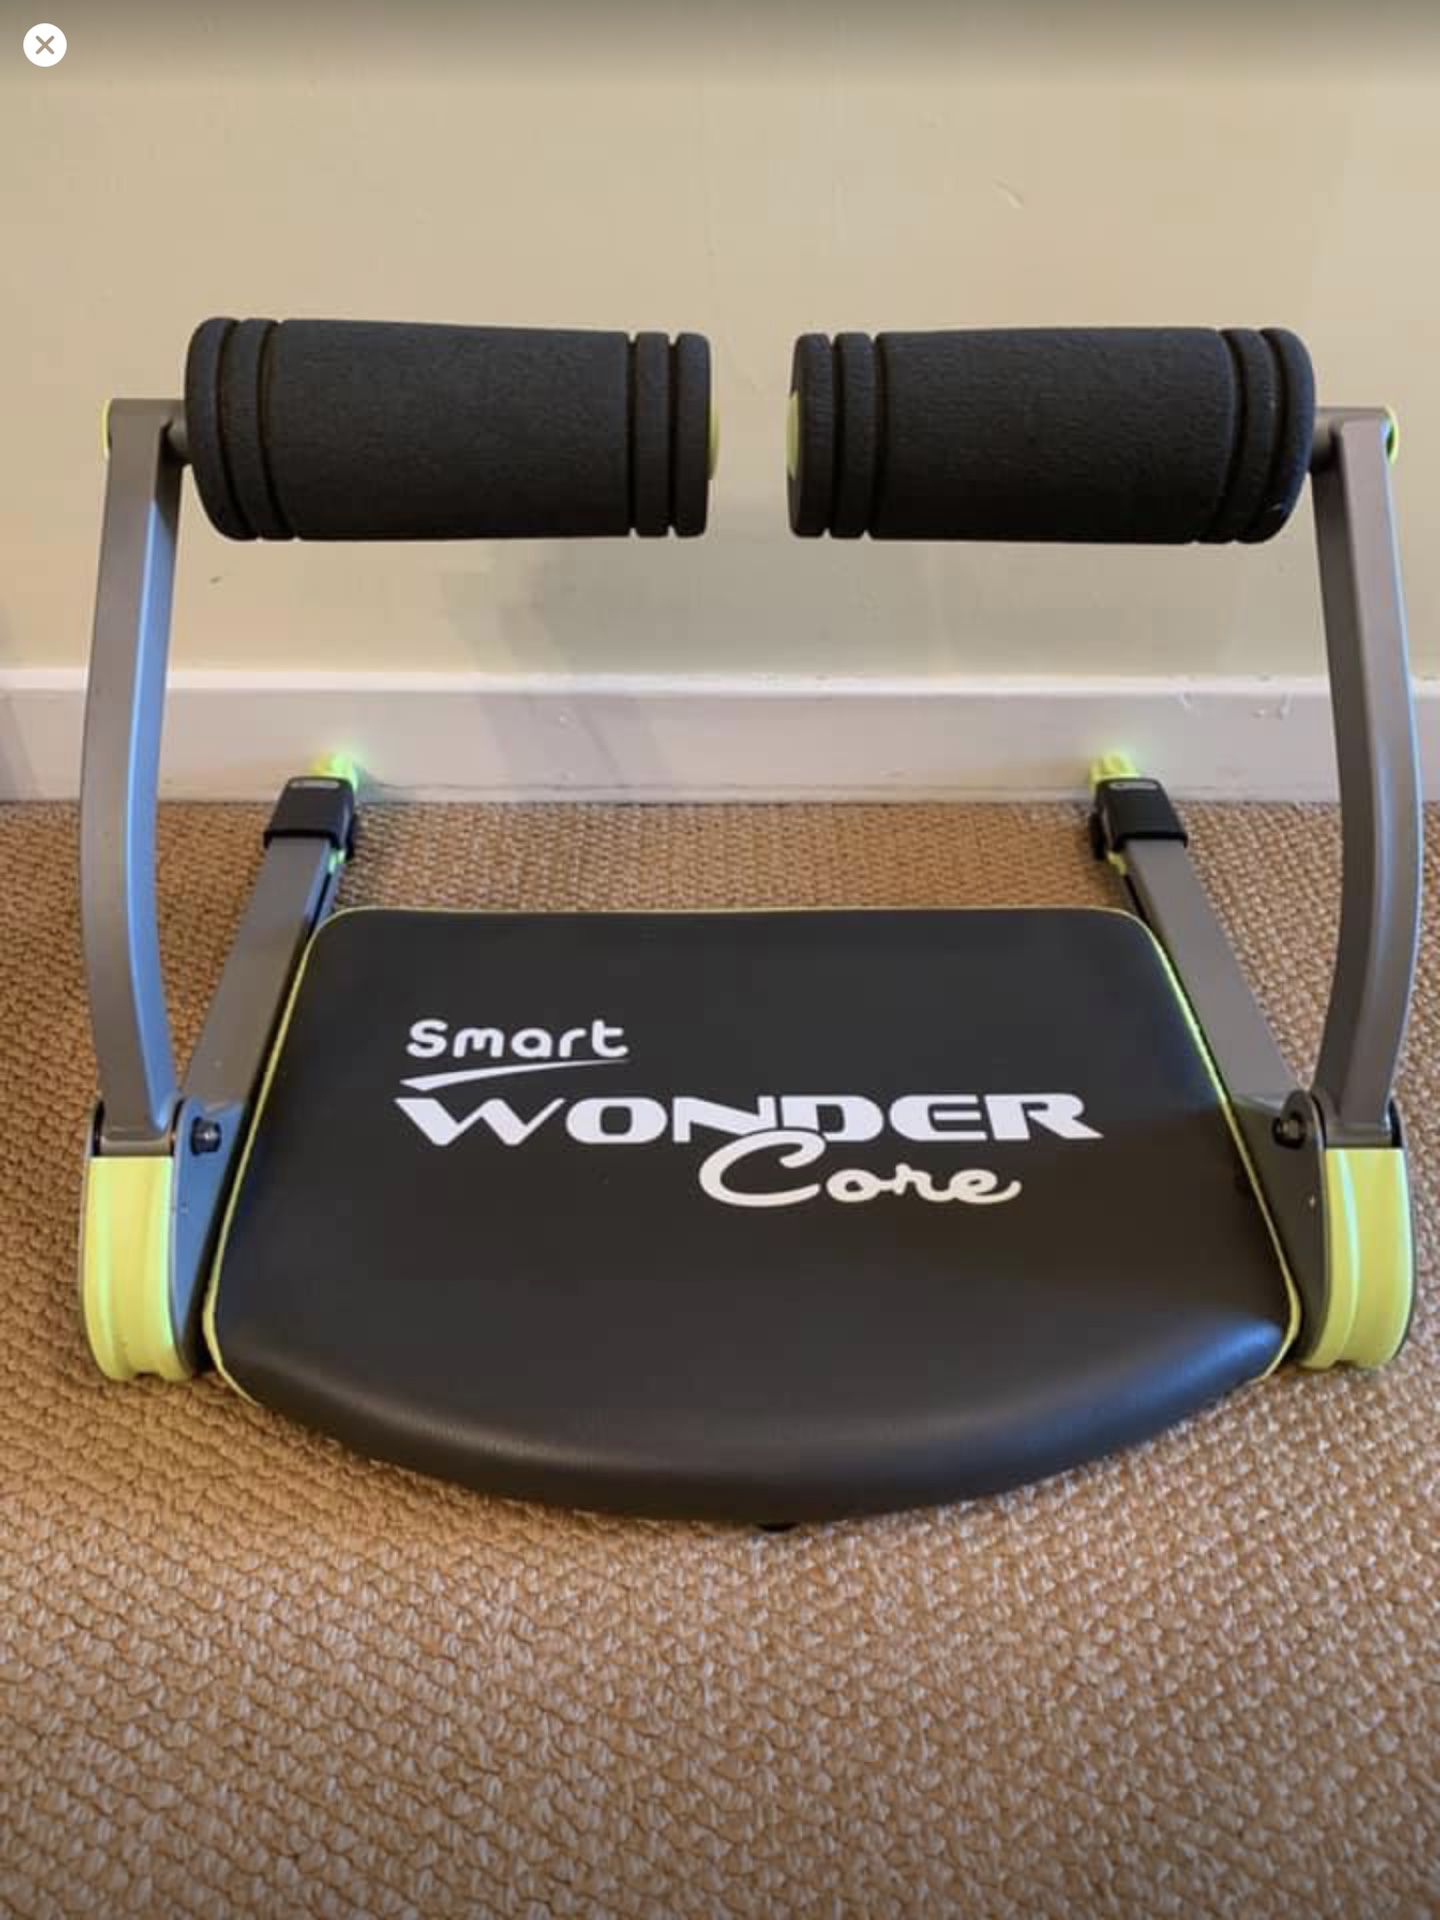 Wonder Core Smart Home Gym Exercise Trainer.